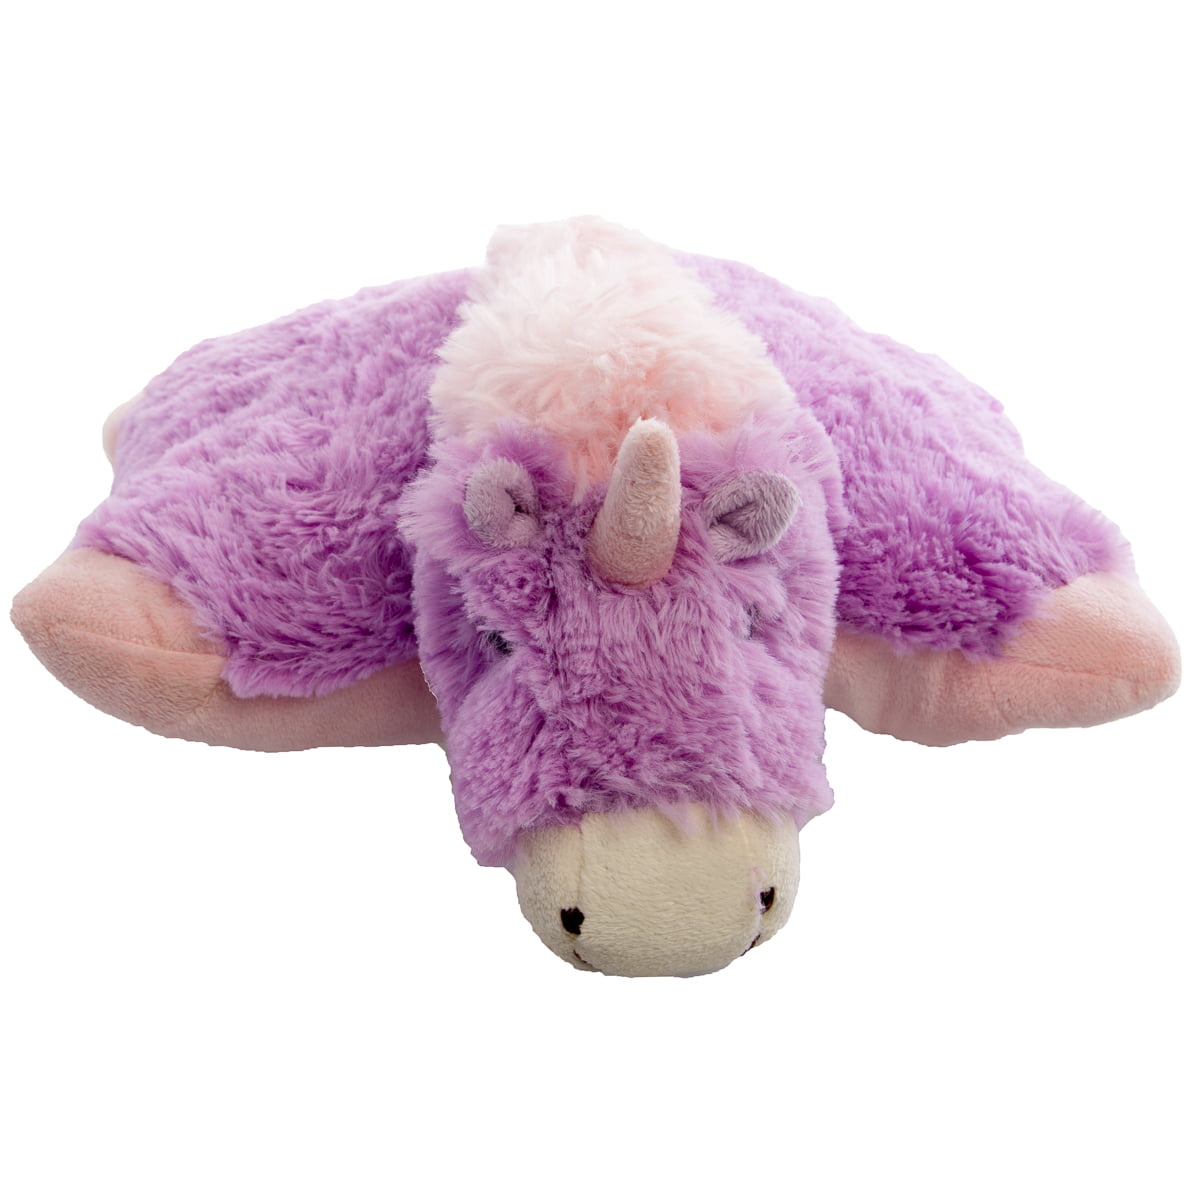 Authentic Pillow Pets Huggable Hippo Lavender Small 11" Plush Toy Gift 